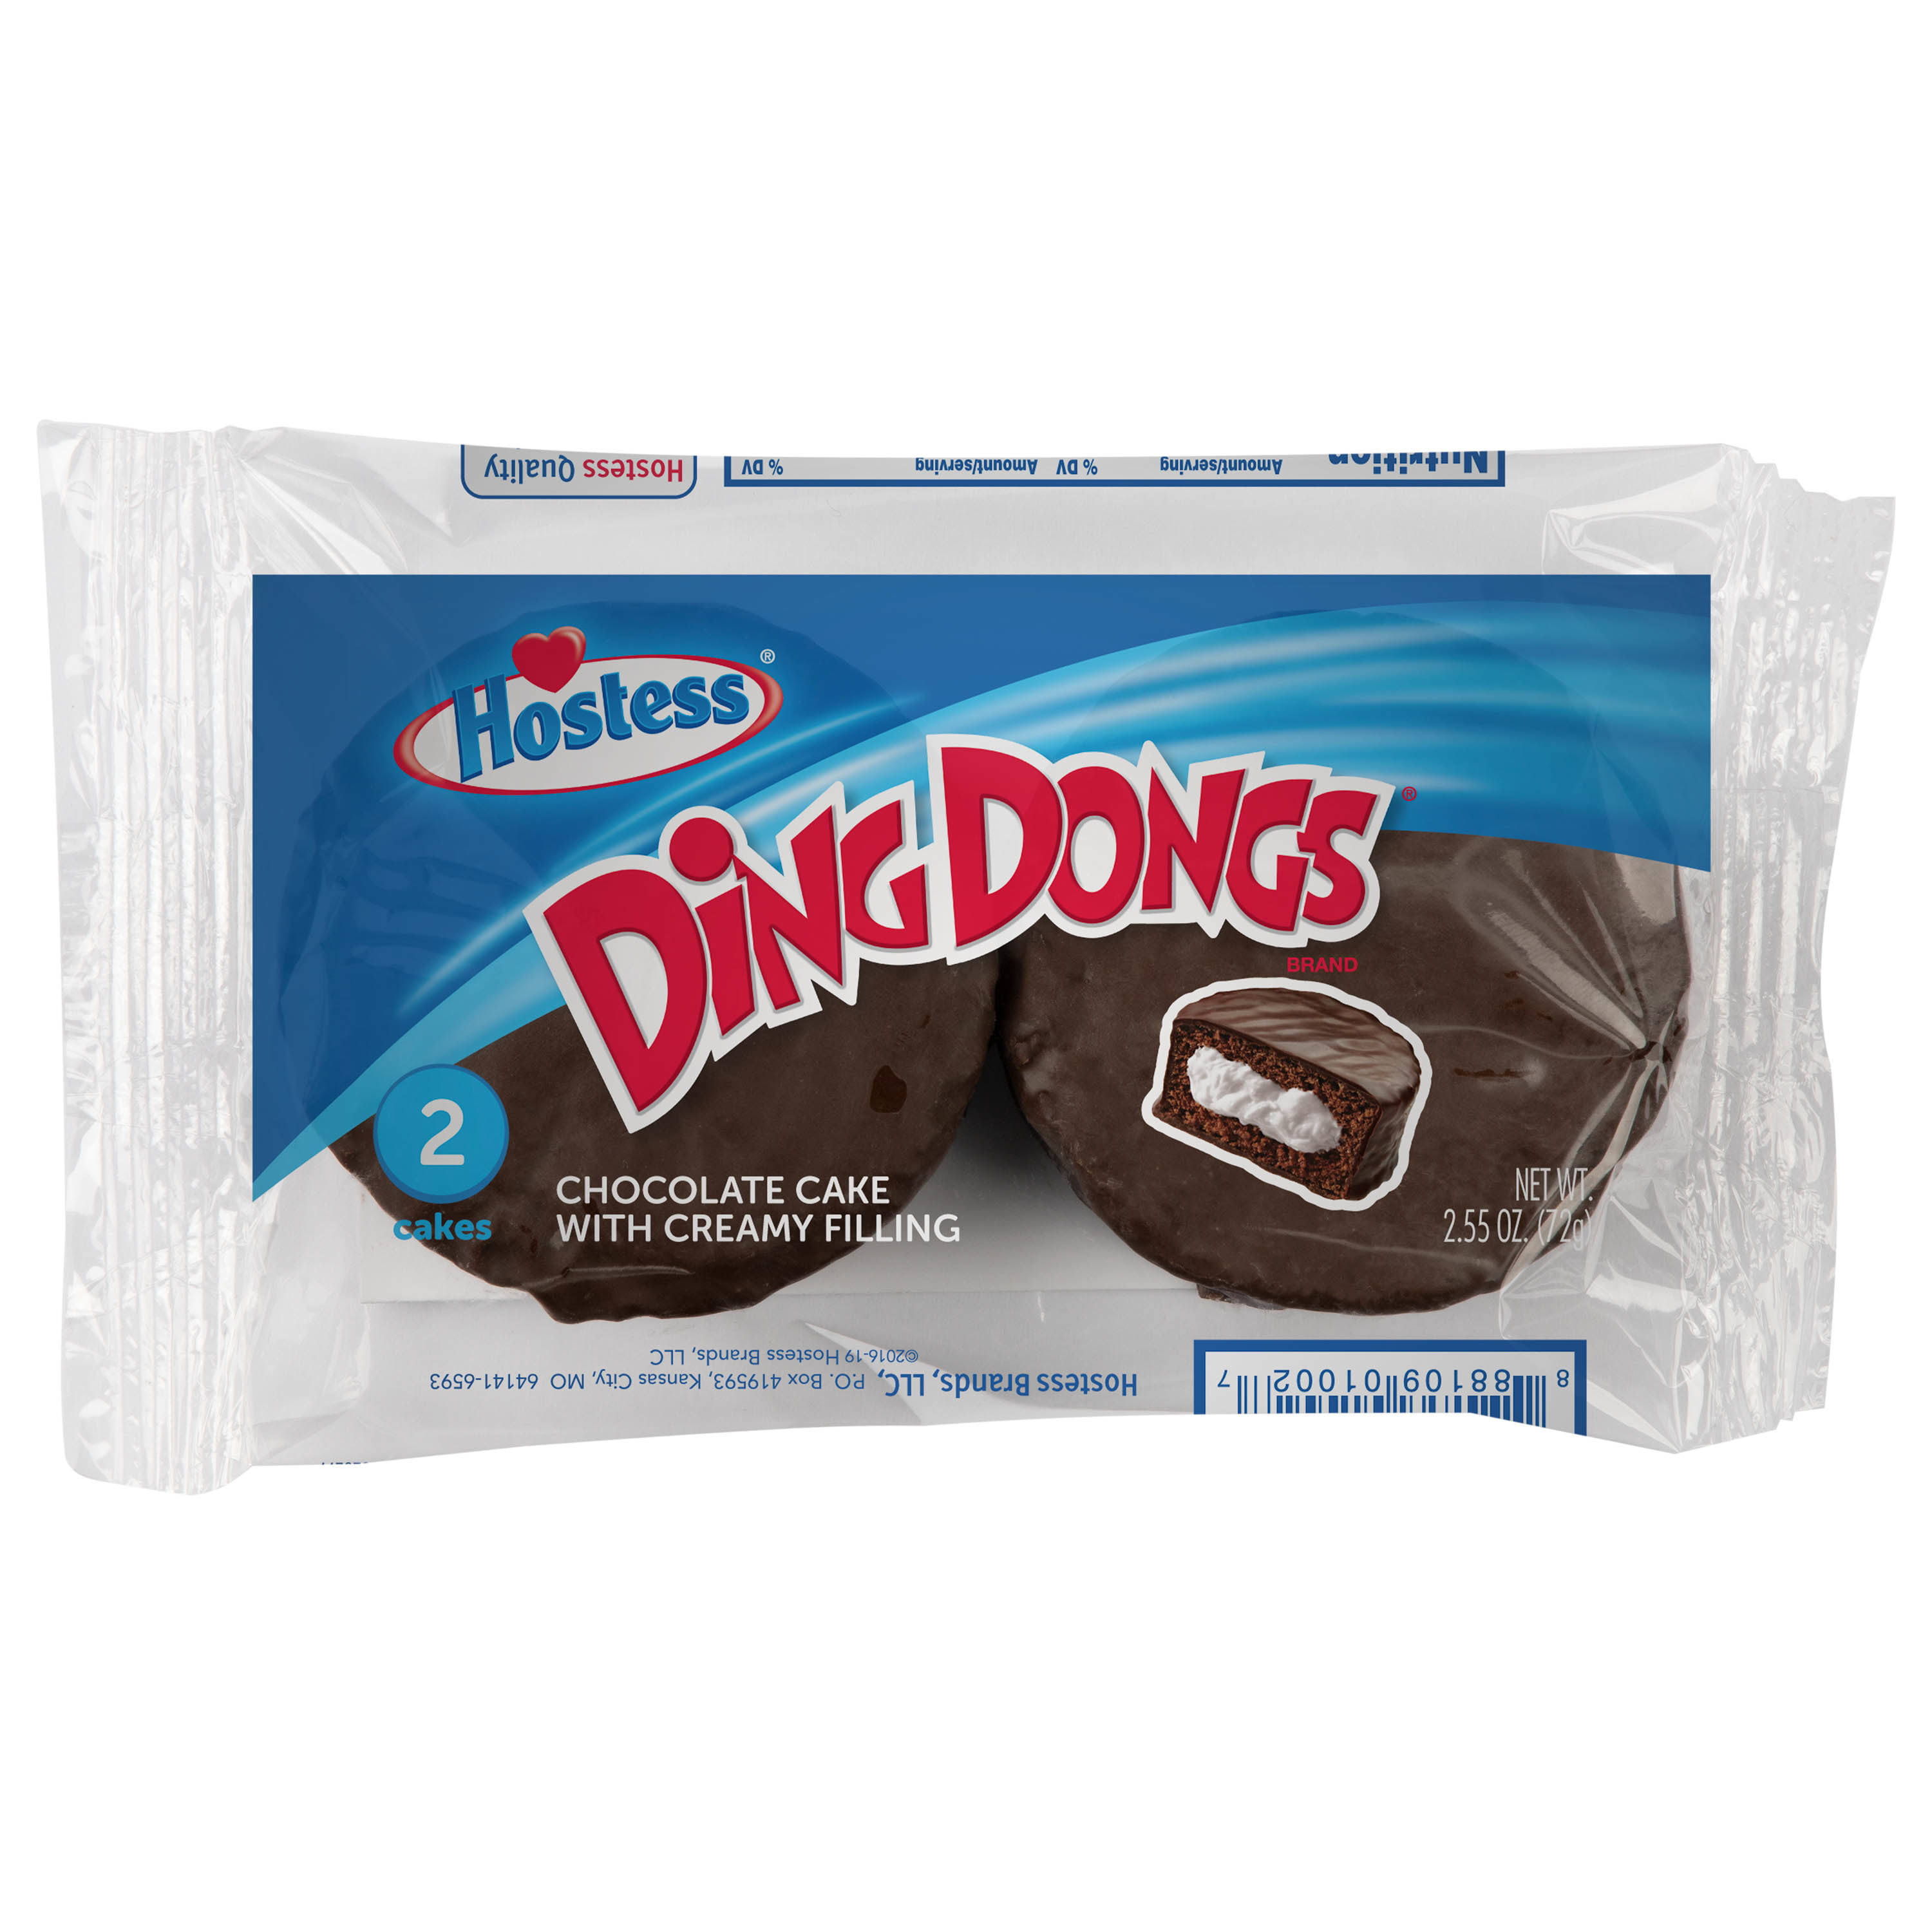 Hostess Ding Dongs Chocolate Cake - with Creamy Filling, 2.55oz, 2ct